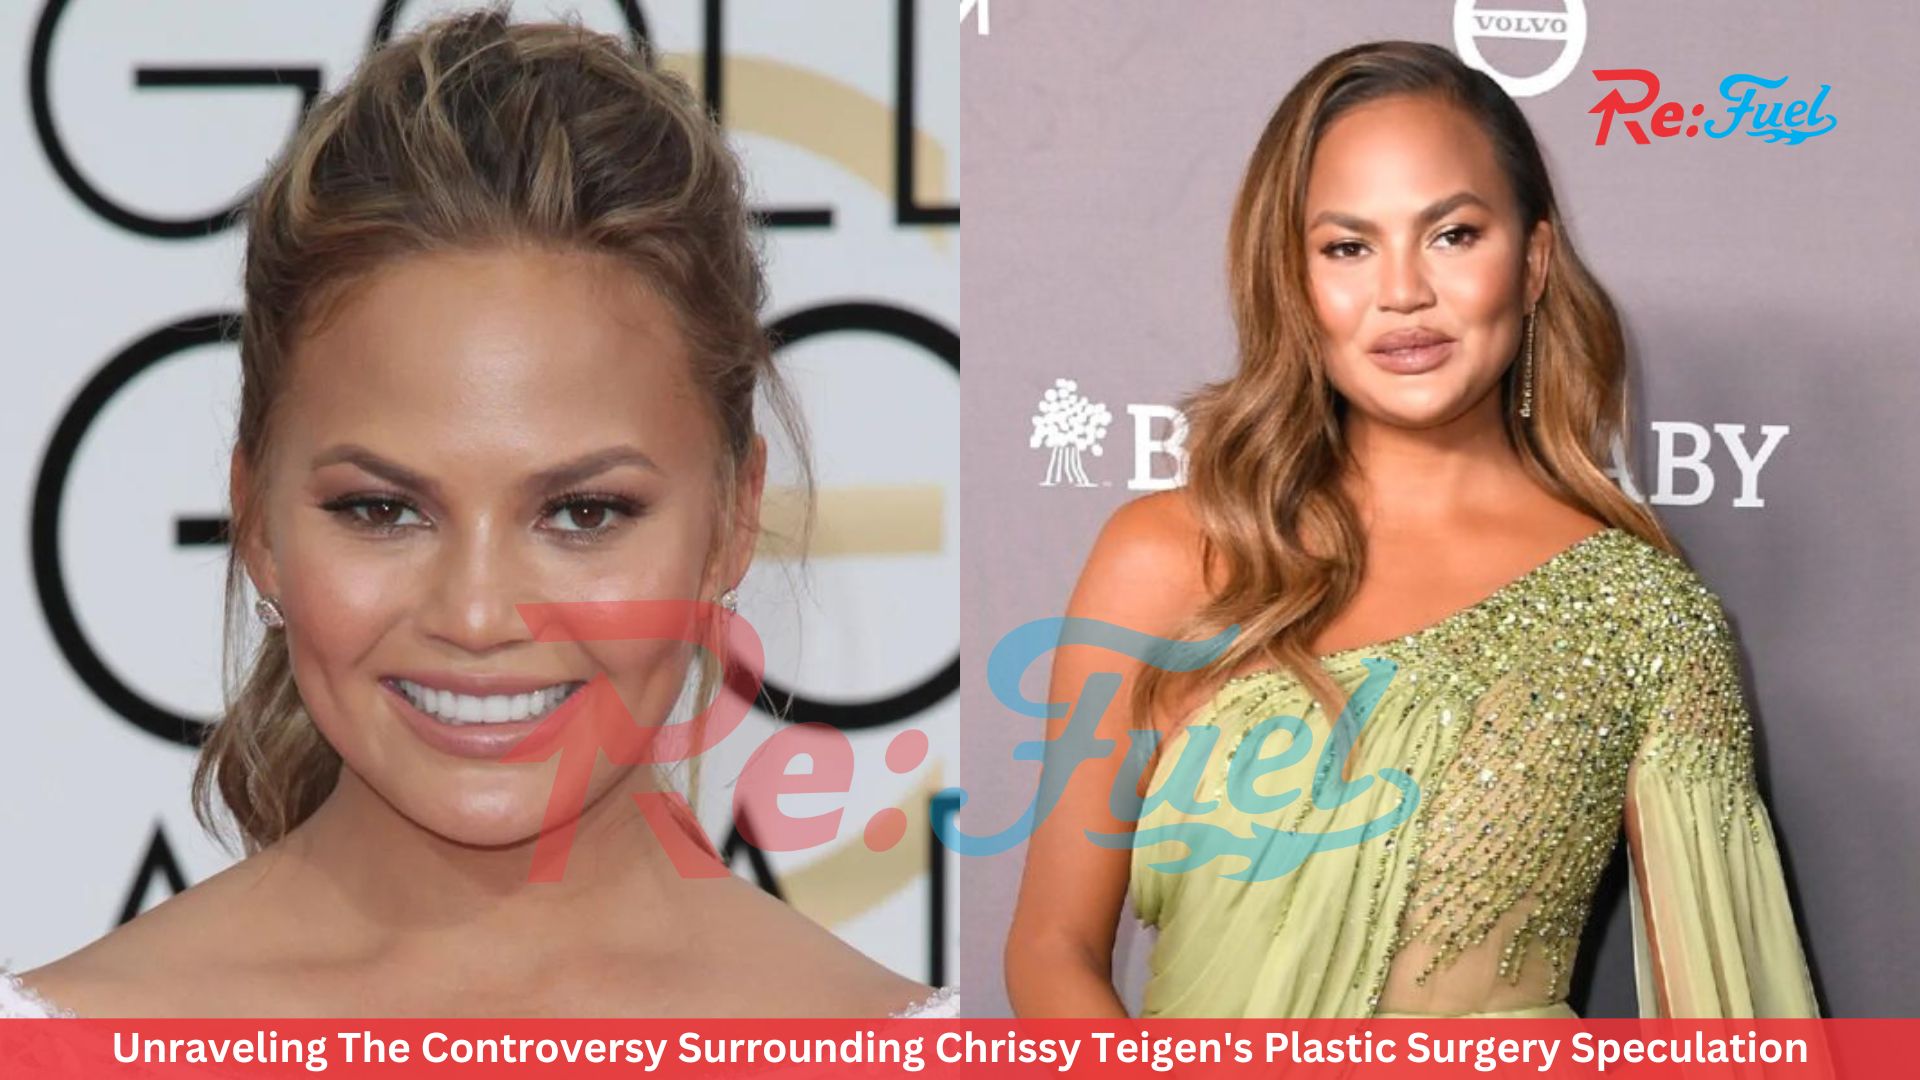 Unraveling The Controversy Surrounding Chrissy Teigen's Plastic Surgery Speculation